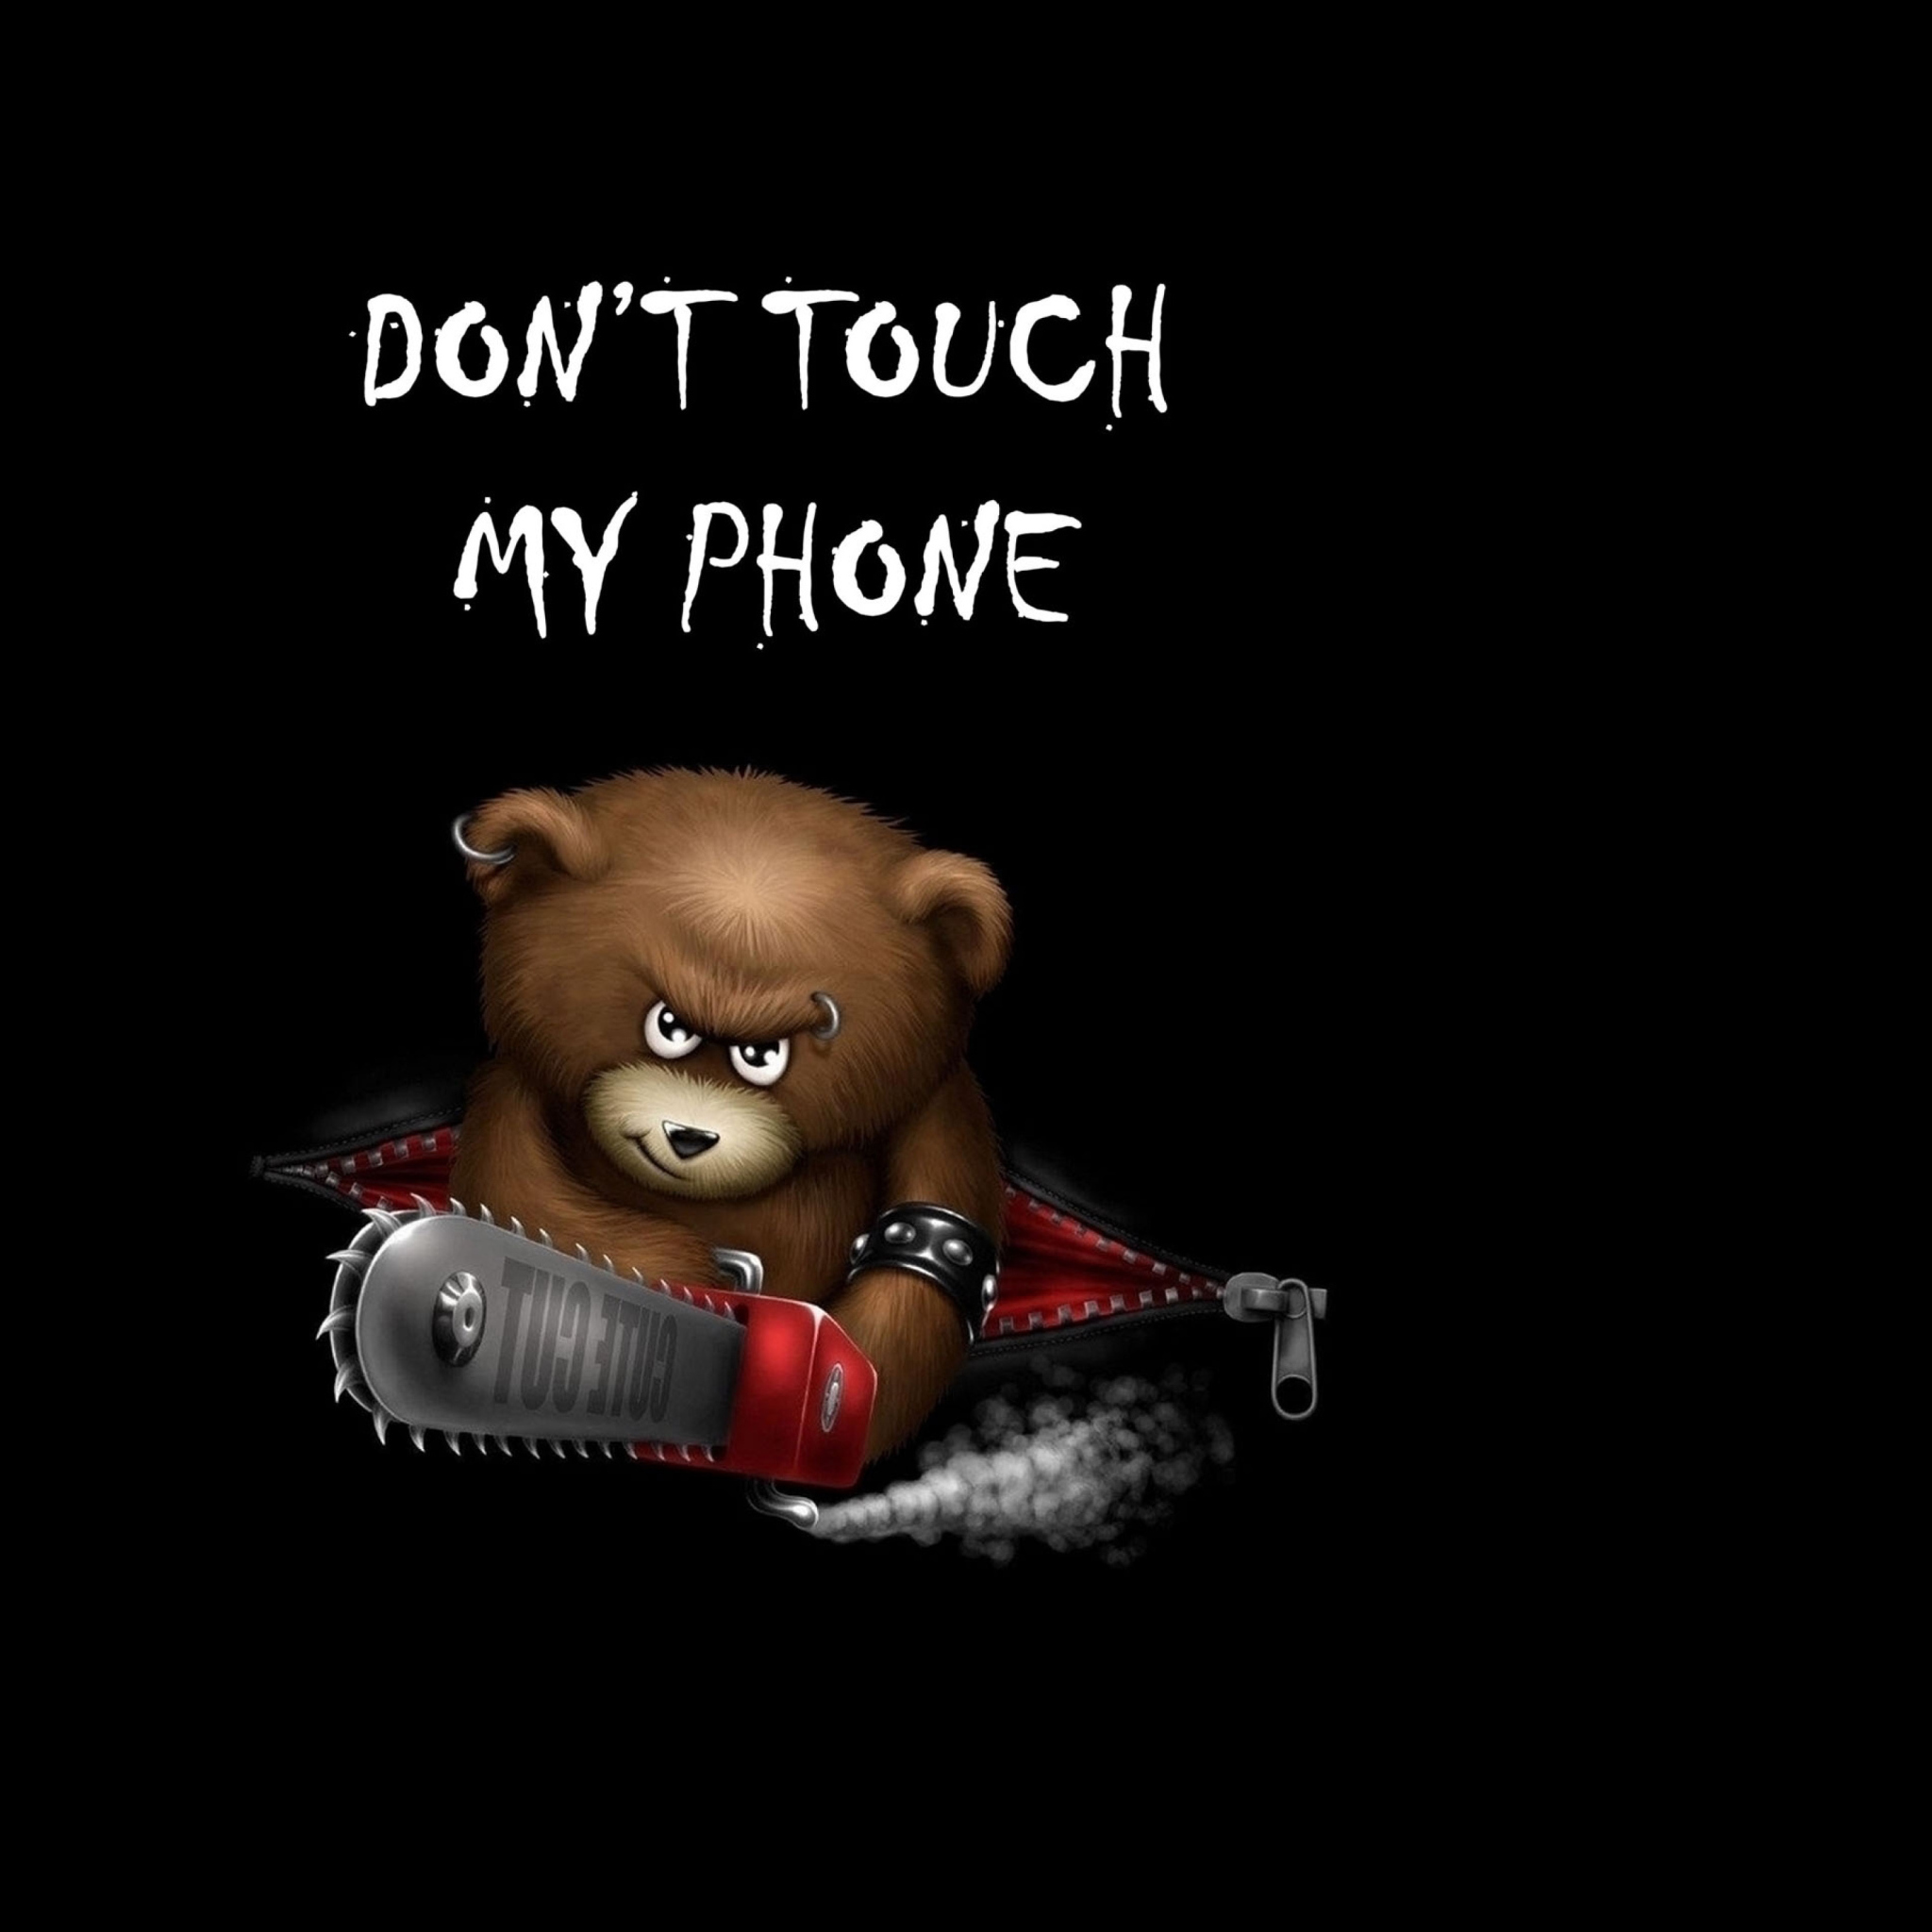 Dont Touch My Phone wallpaper 2048x2048